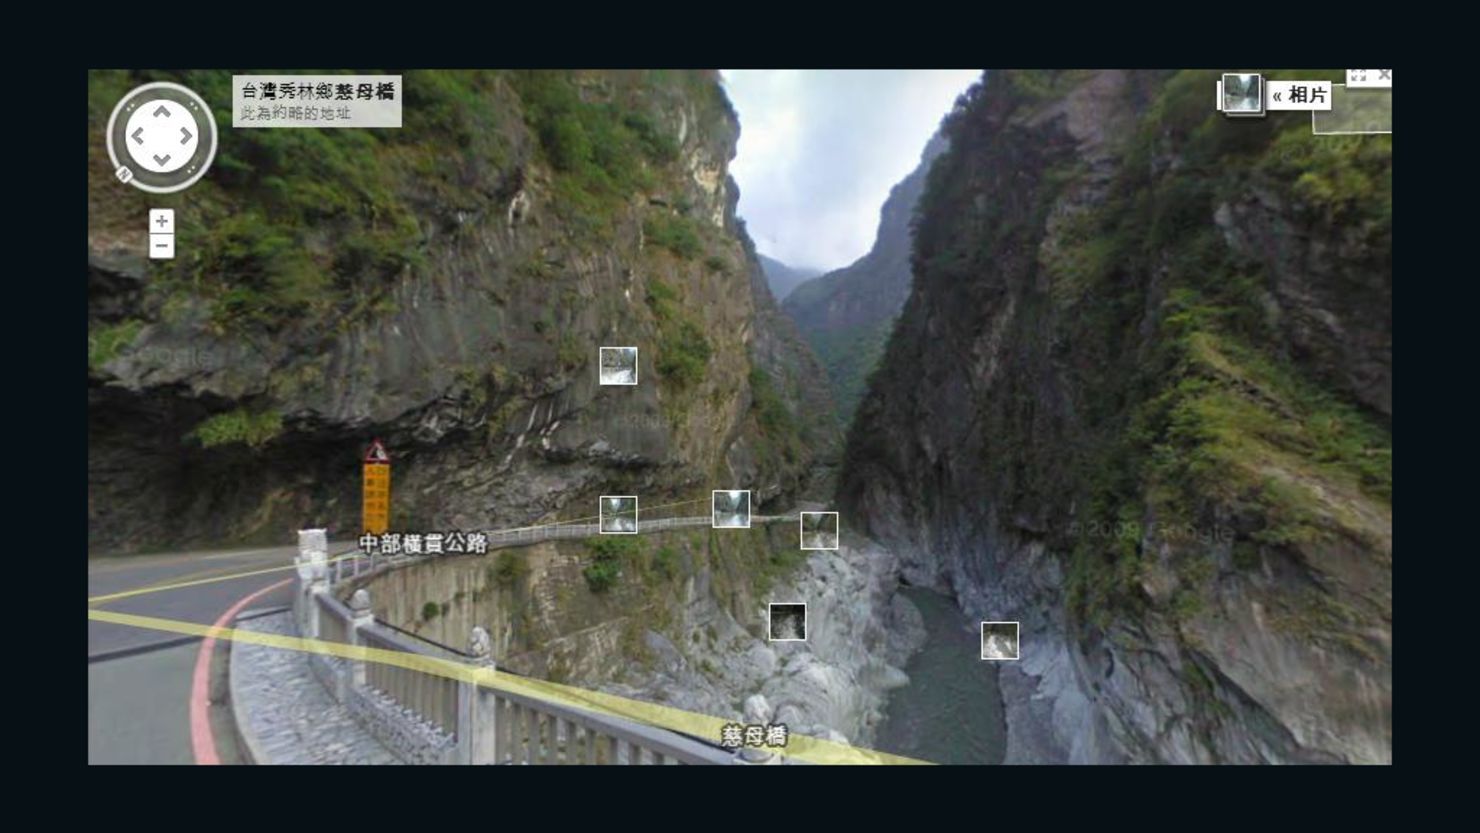 Taroko Gorge, in the Taroko National Park in Taiwan, was part of 250,000 miles added to Google's Street View in an update.